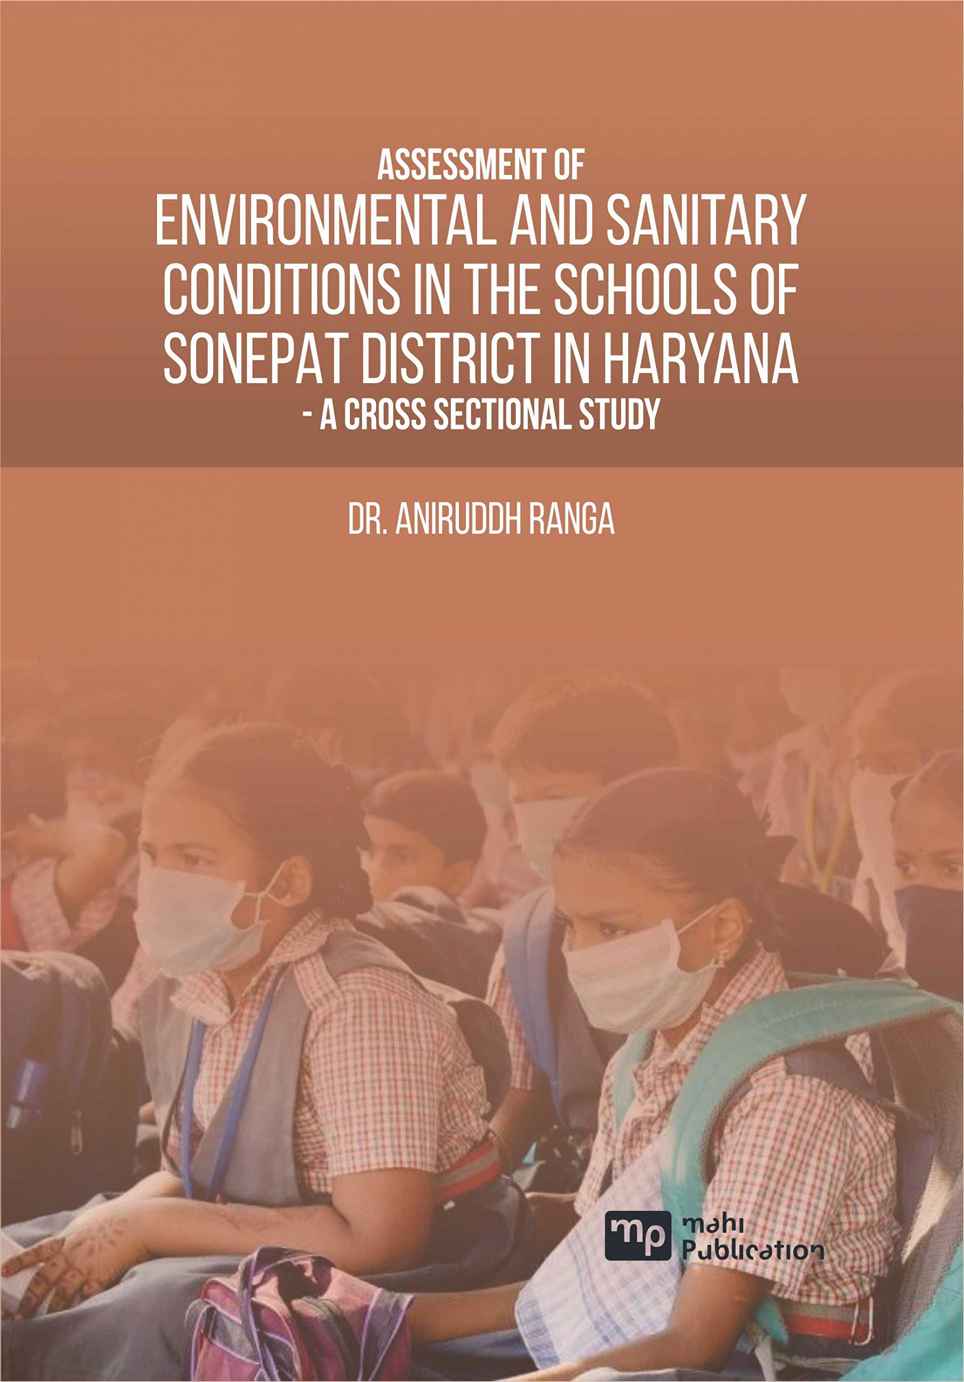 Assessment of Environmental and Sanitary Conditions in The Schools of Sonepat District in Haryana - A Cross Sectional Study